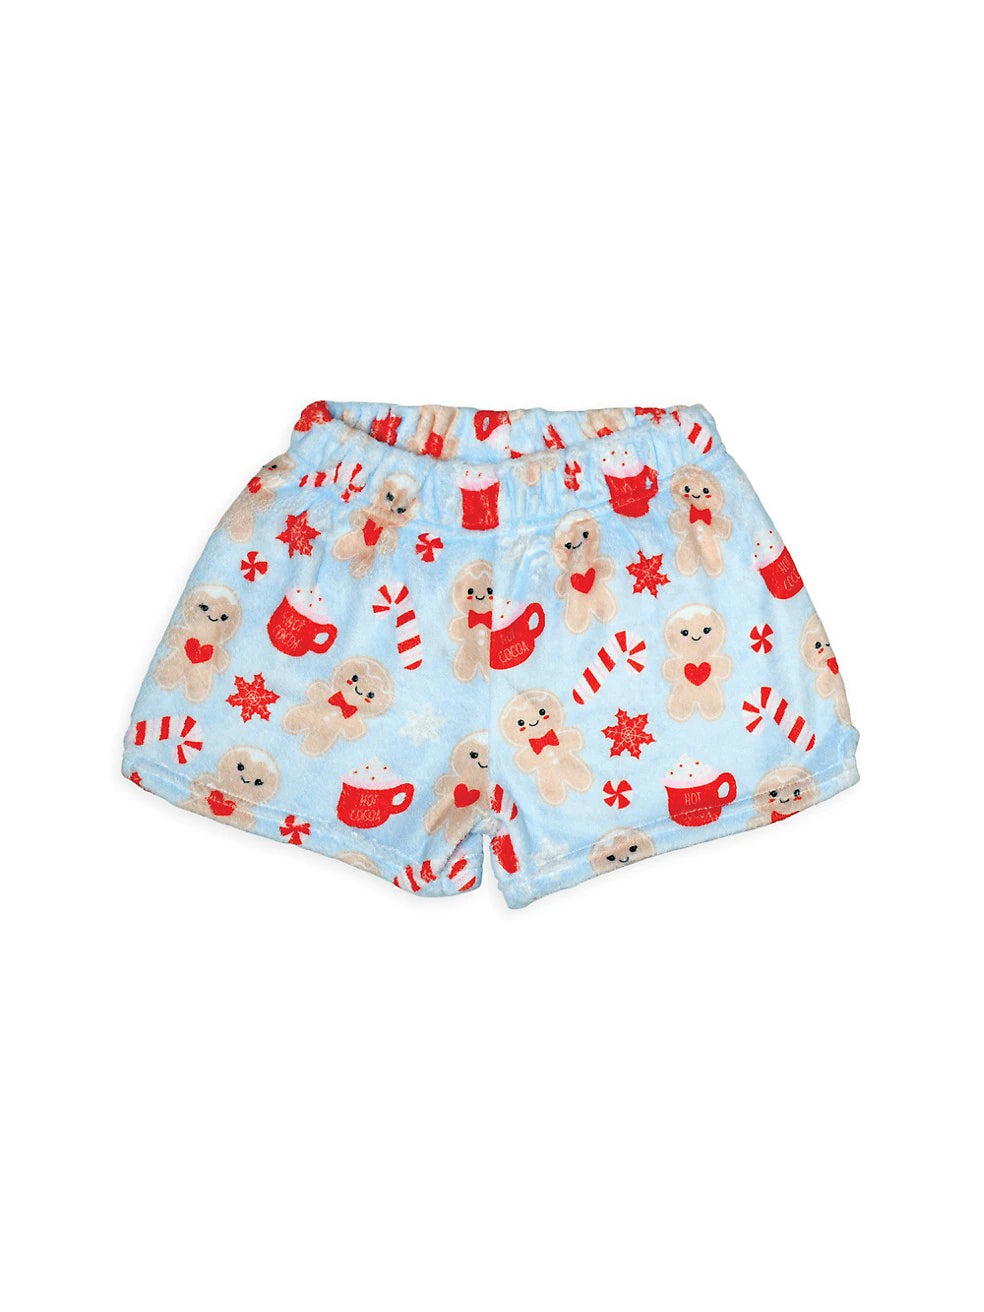 The Gingerbread Sweethearts Plush Shorts